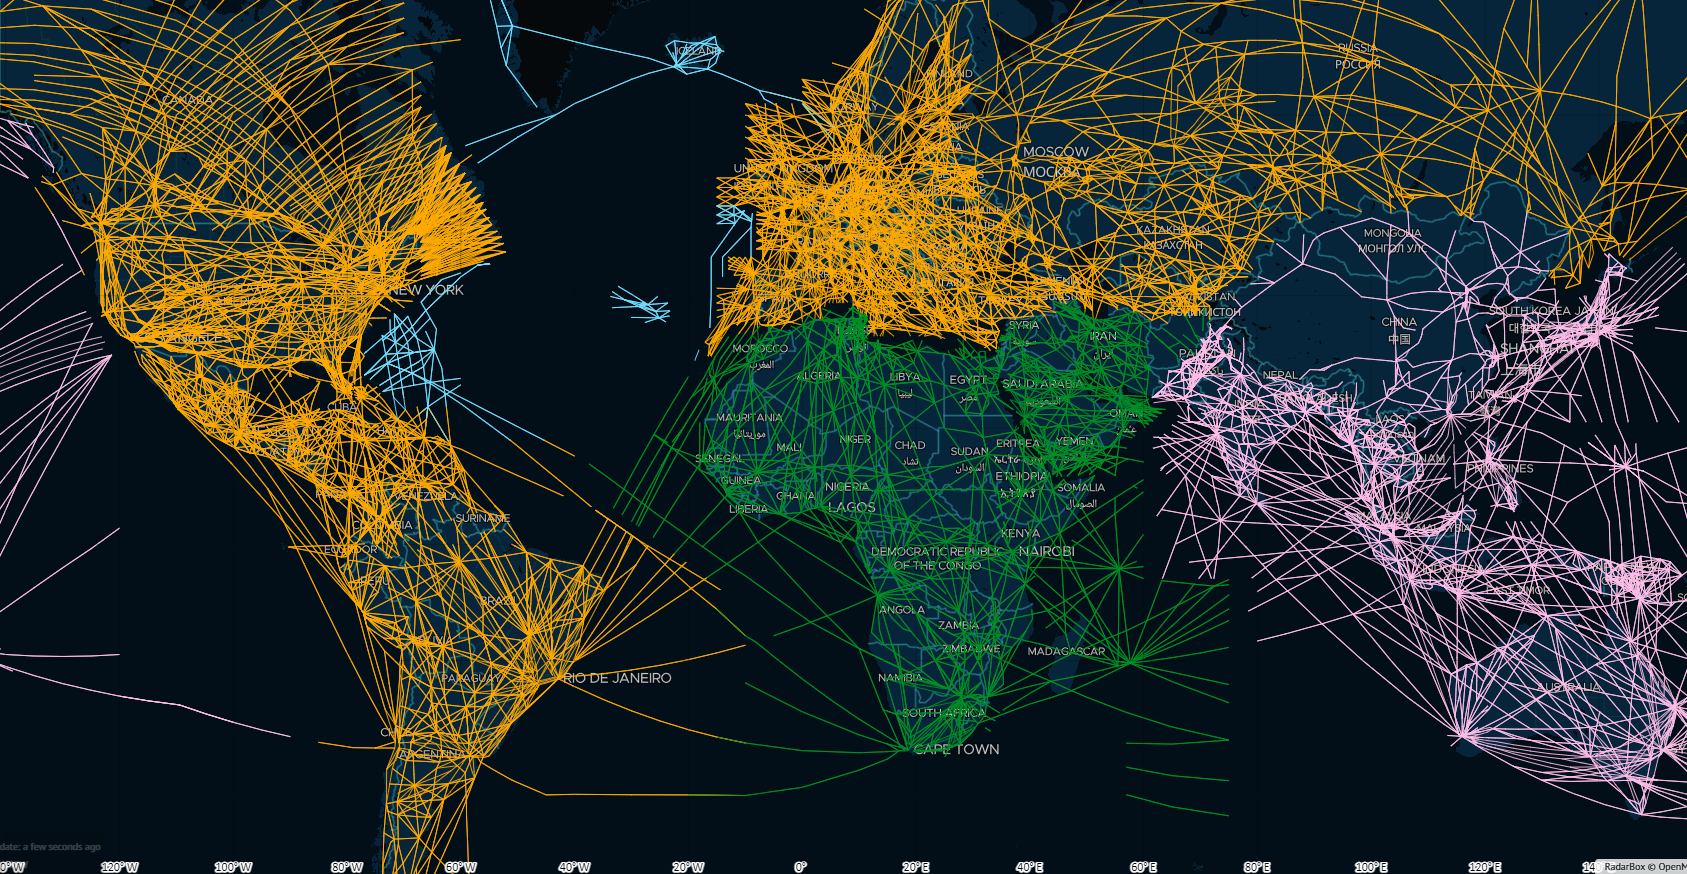 Image Above: Flight Routes Displayed Over 6 Continents.